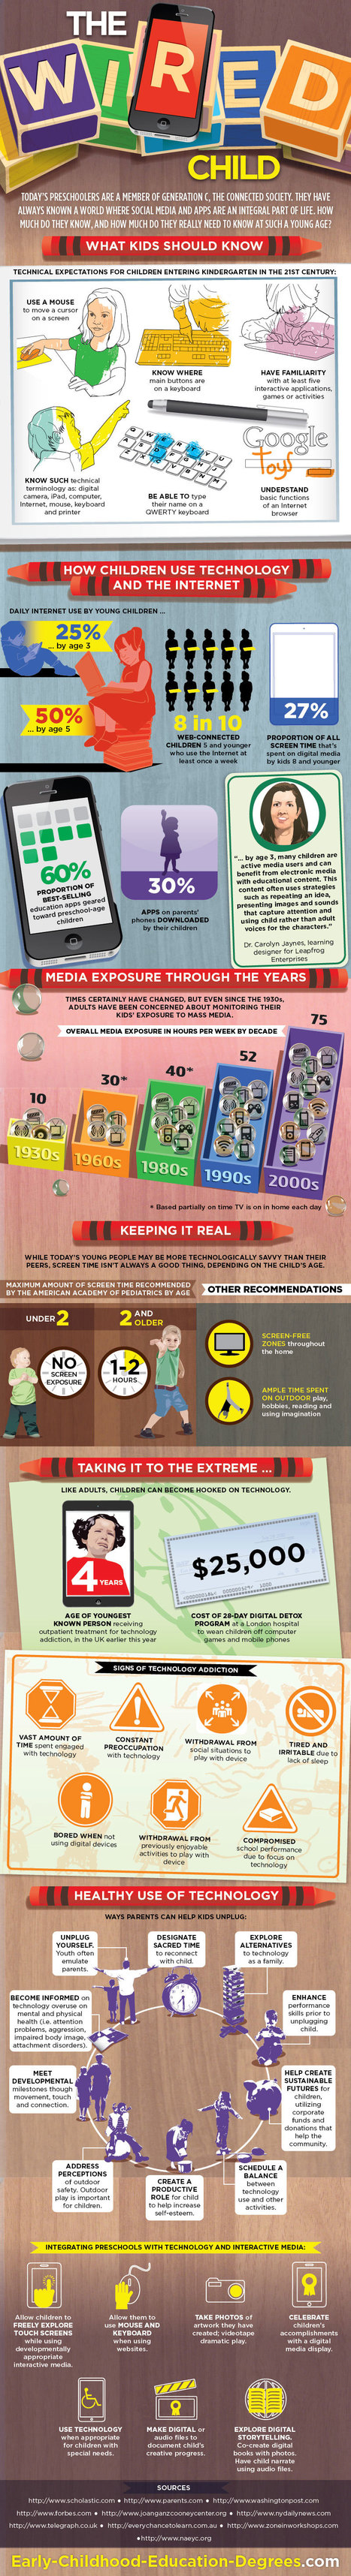 The Complete Visual Guide To Technology For Children [Infographic] | Education Matters - (tech and non-tech) | Scoop.it